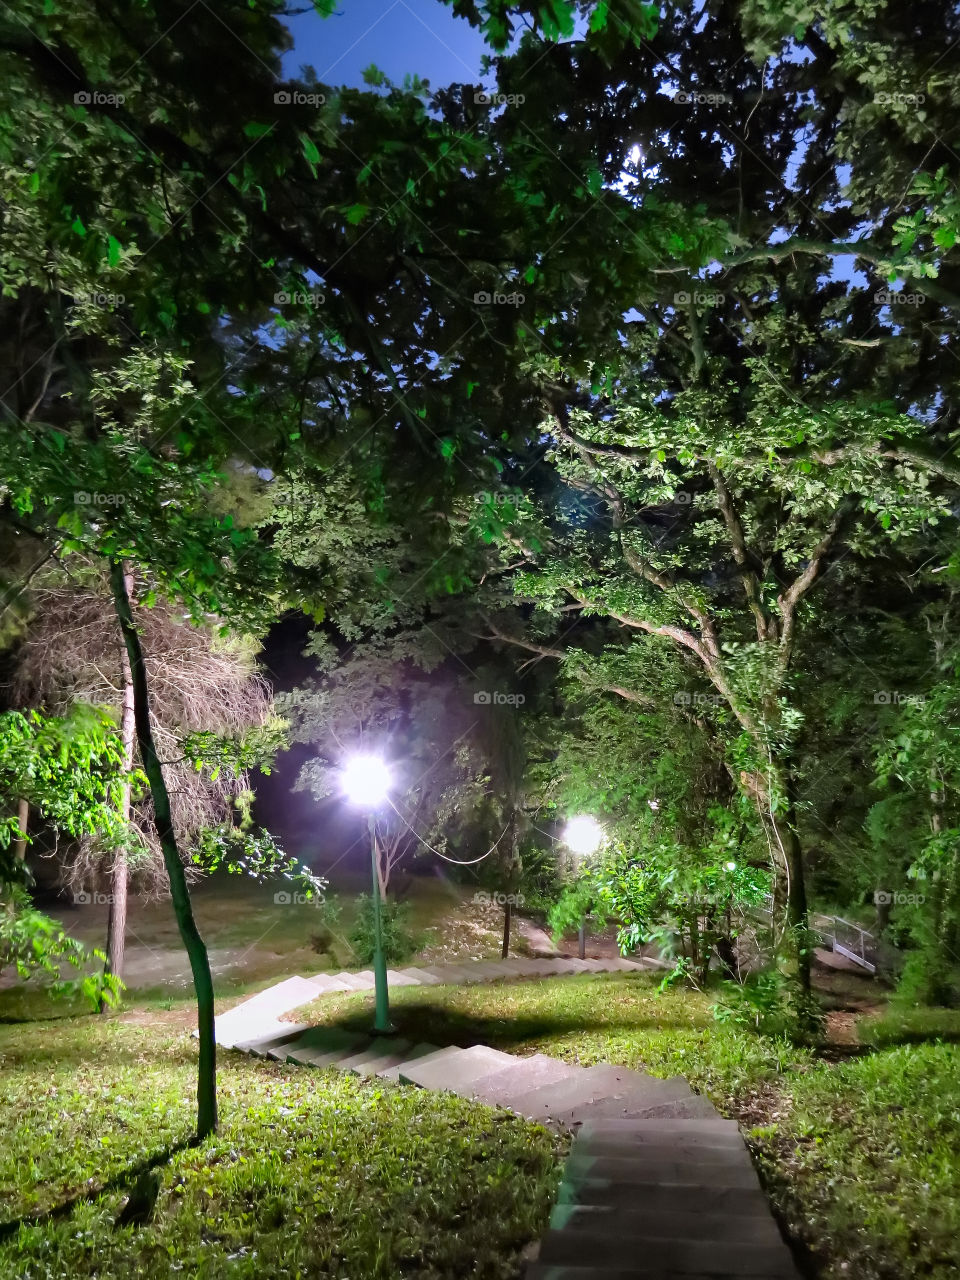 night forest, magical, mysterious, light, trees, south, Sochi, lantern, romance, sleep, midnight, walk, insomnia, August, greens, color,
stairs, stairs, stars, sky, landscape,